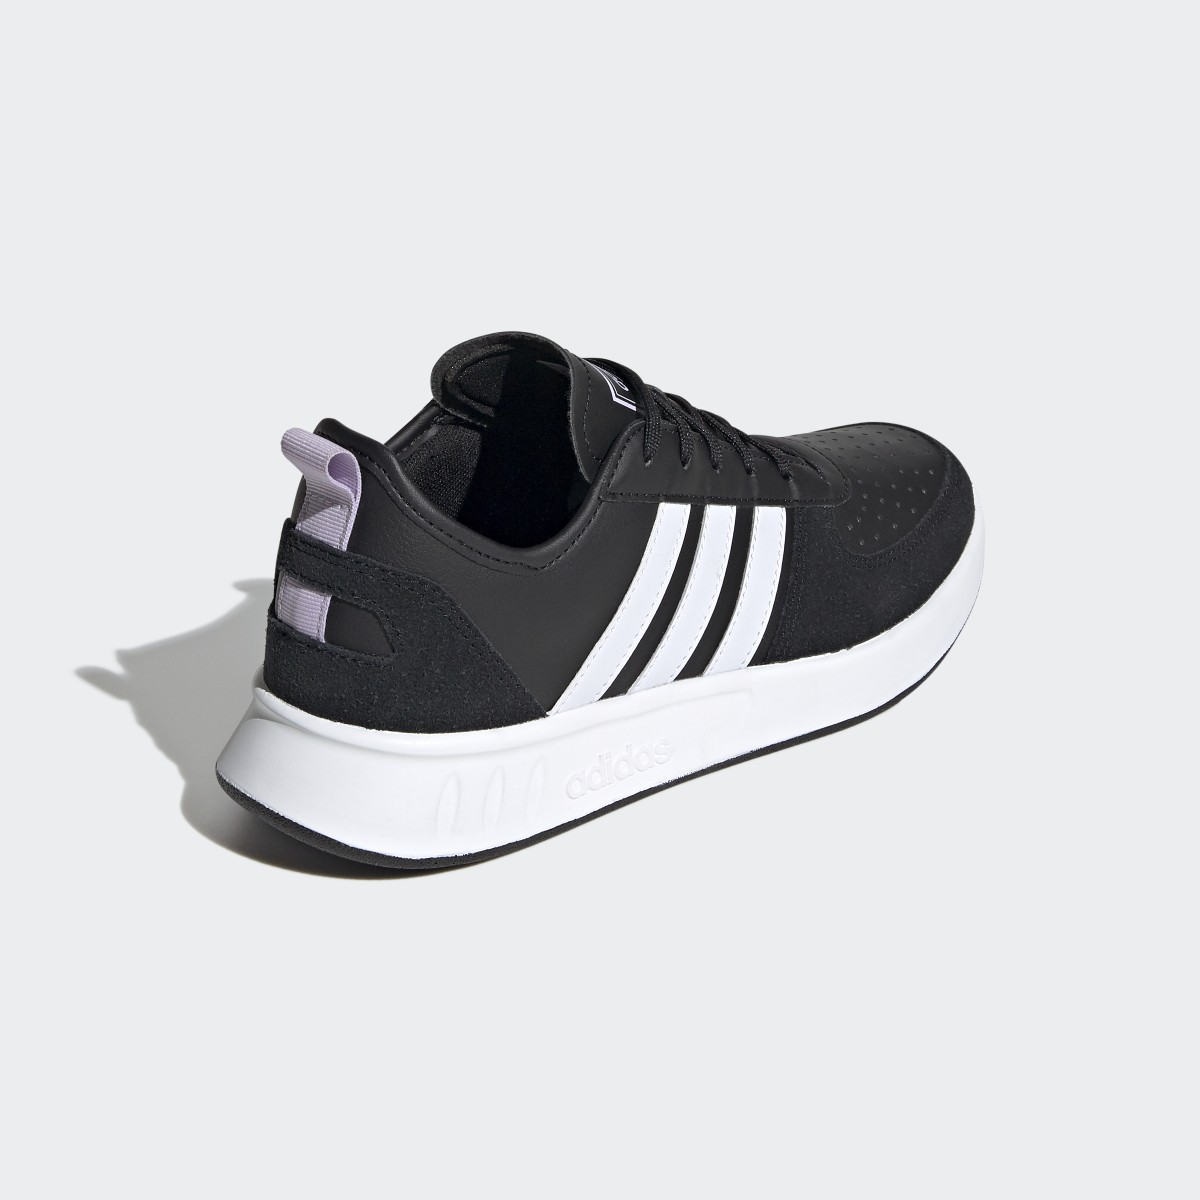 Adidas Court 80s Shoes. 6